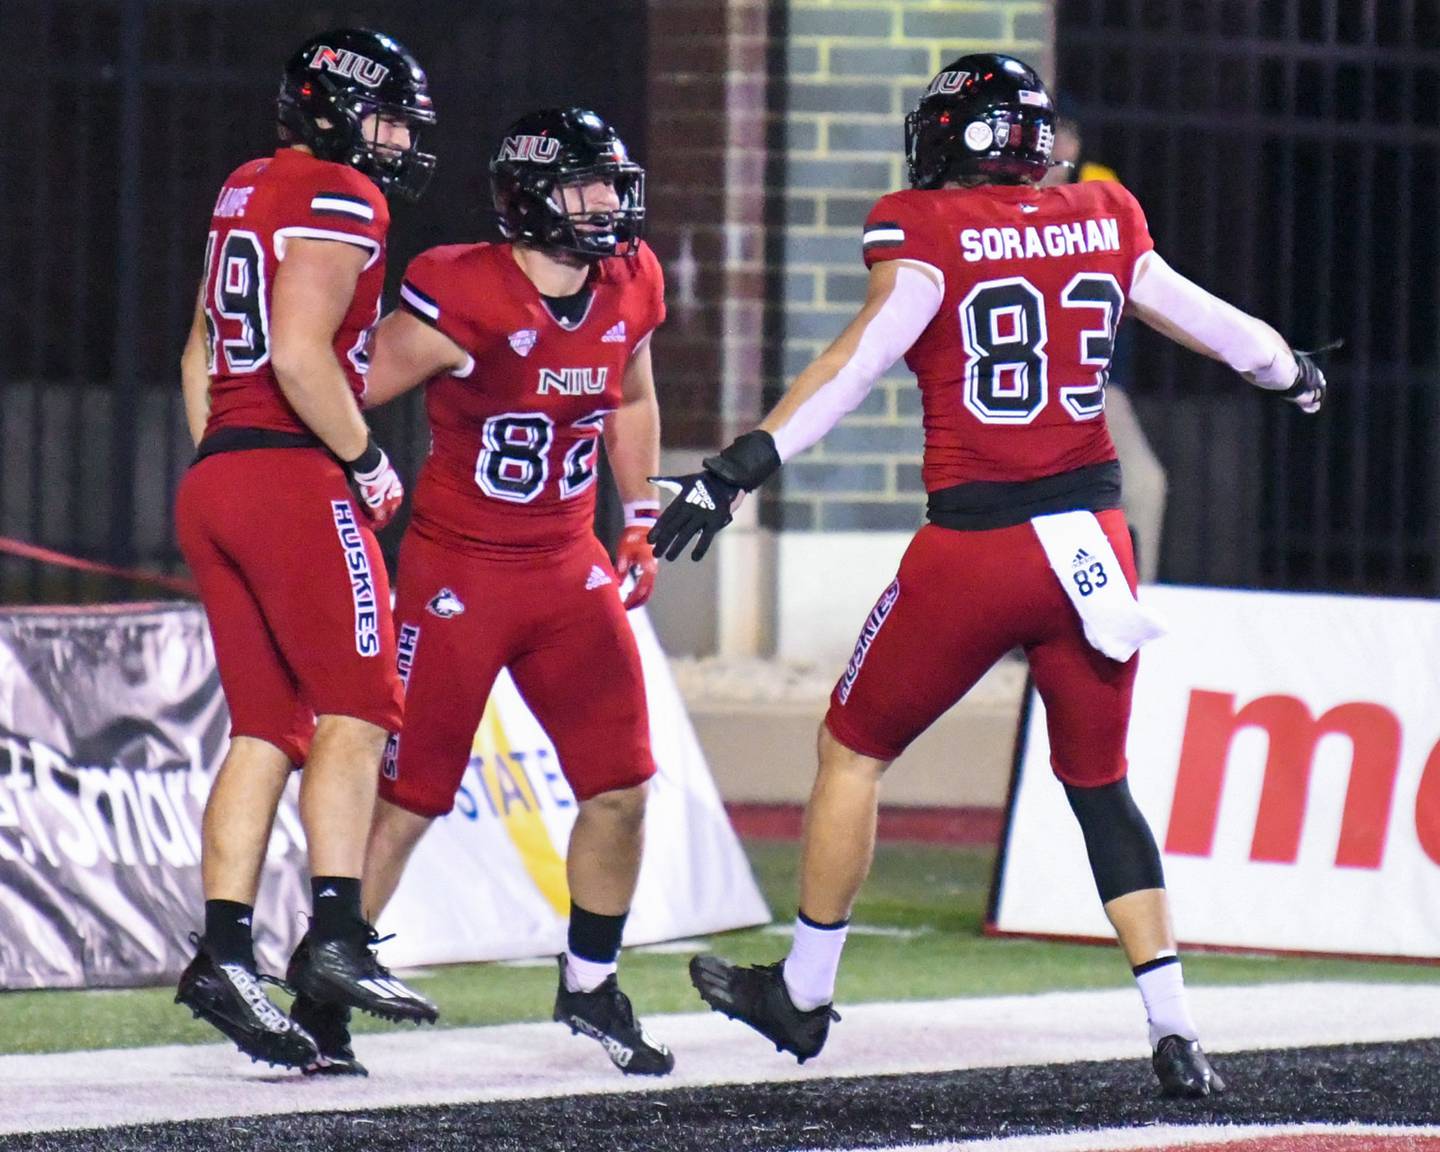 NIU tight end Tristen Tewes, 82, celebrates with teammates Brock Lampe, left, and Liam Soraghan, 83, after Tristen scoring a touchdown in the fourth quarter at Huskies Stadium in DeKalb on Wednesday Nov. 2nd.